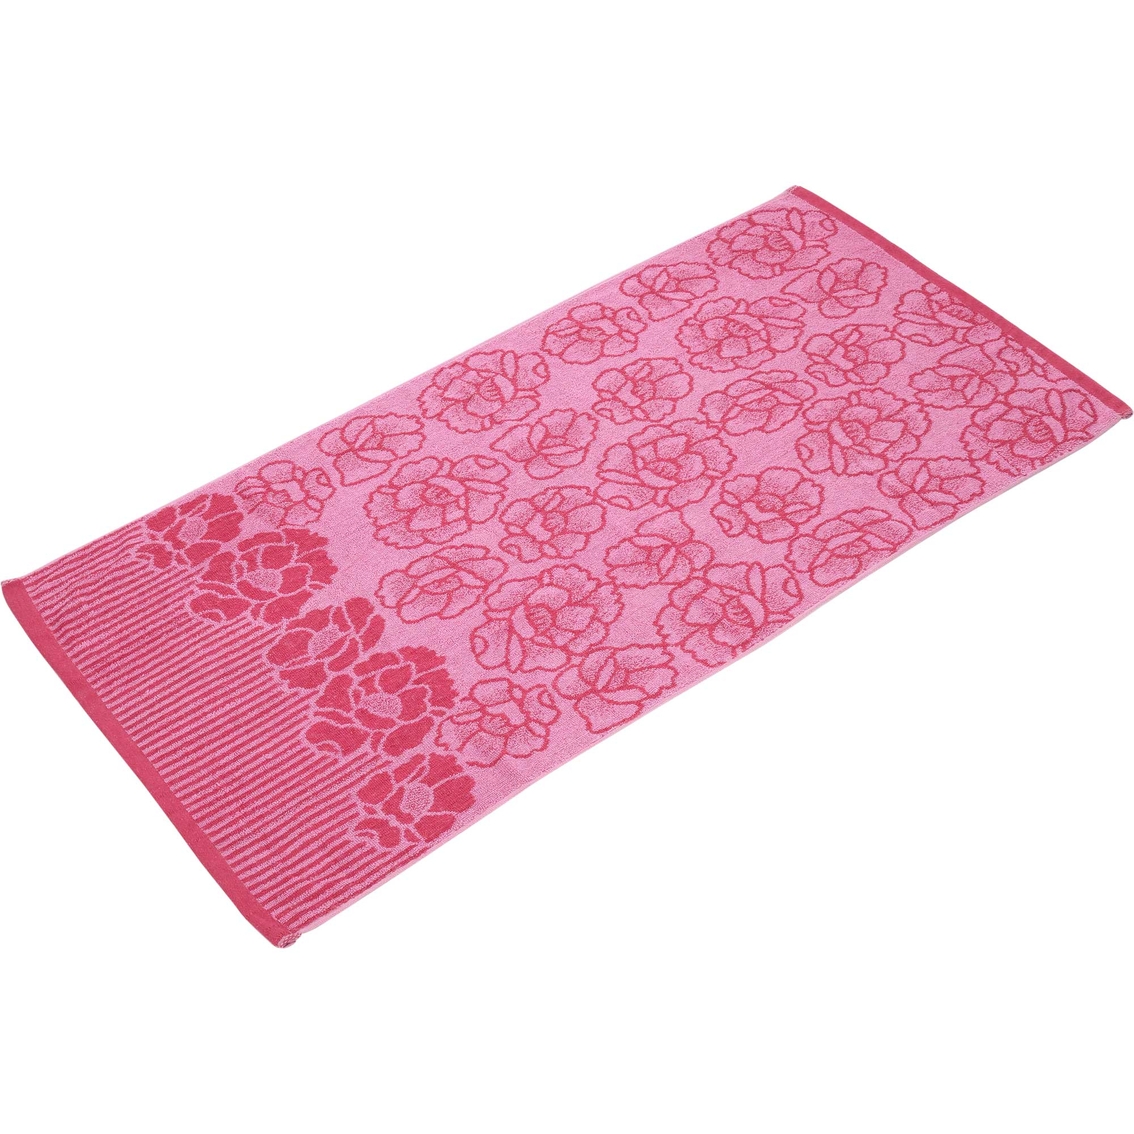 Simply Perfect Beach Towels 2 pk. - Image 3 of 6